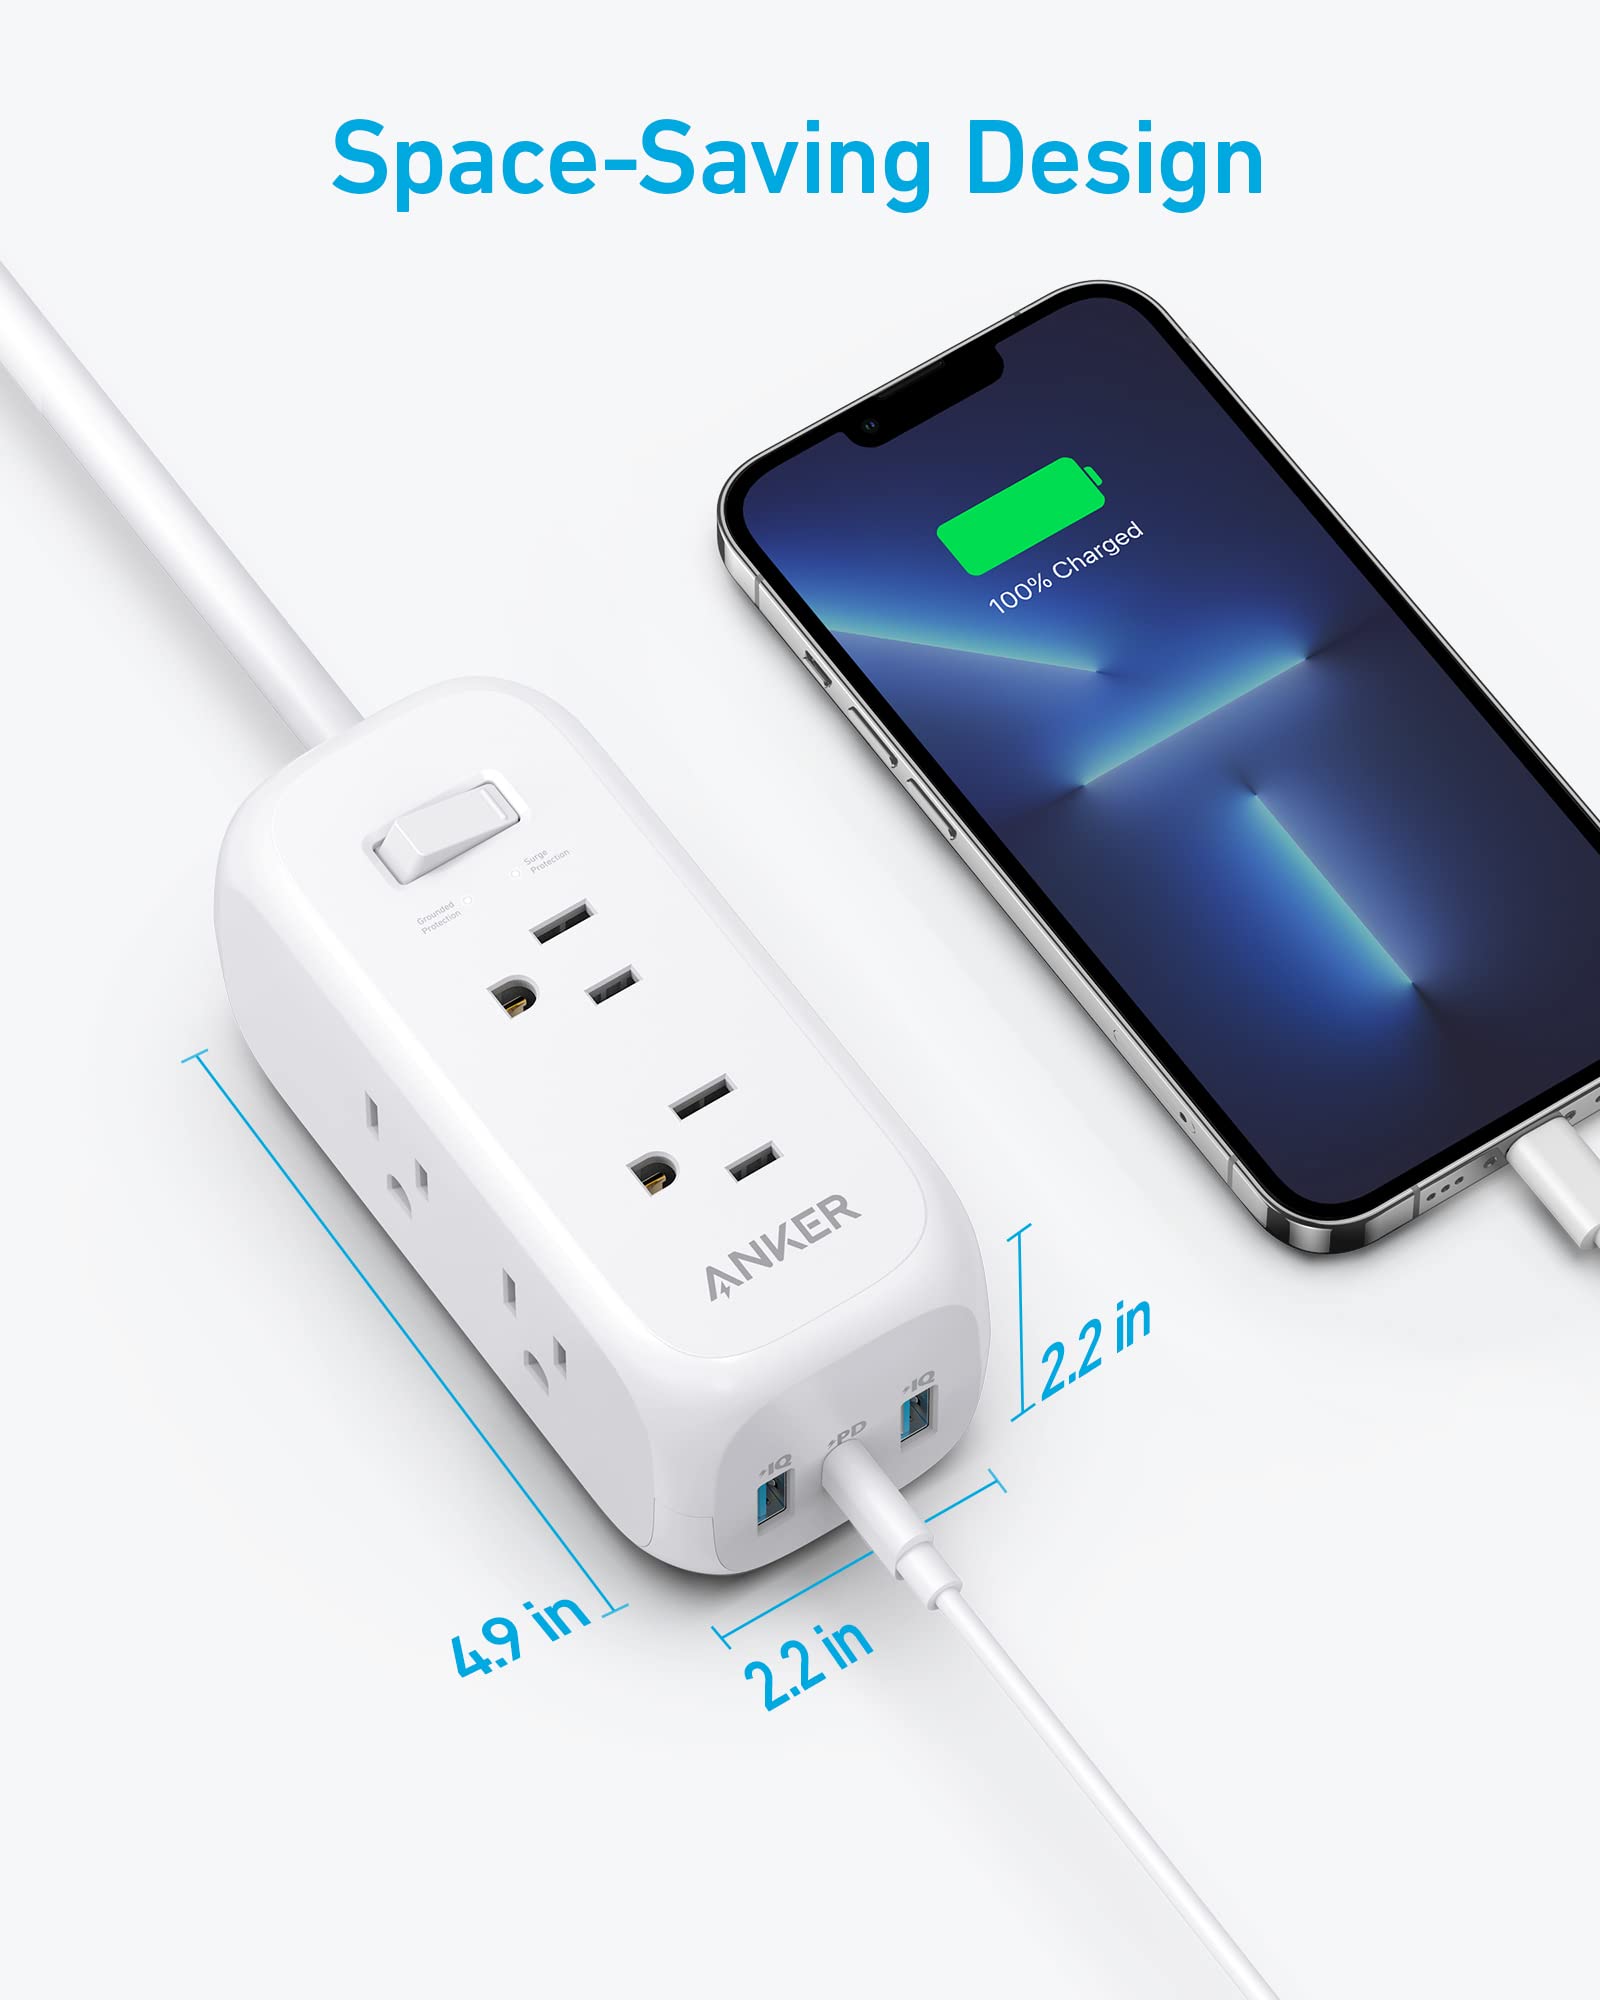 Anker USB C Power Strip Surge Protector(300J), Power Strip, 6 Outlets, 20W Power Delivery, 3-Side Outlet Extender, 5ft Extension Cord, TUV Listed, Ideal for Desk use, Compact for Small Spaces